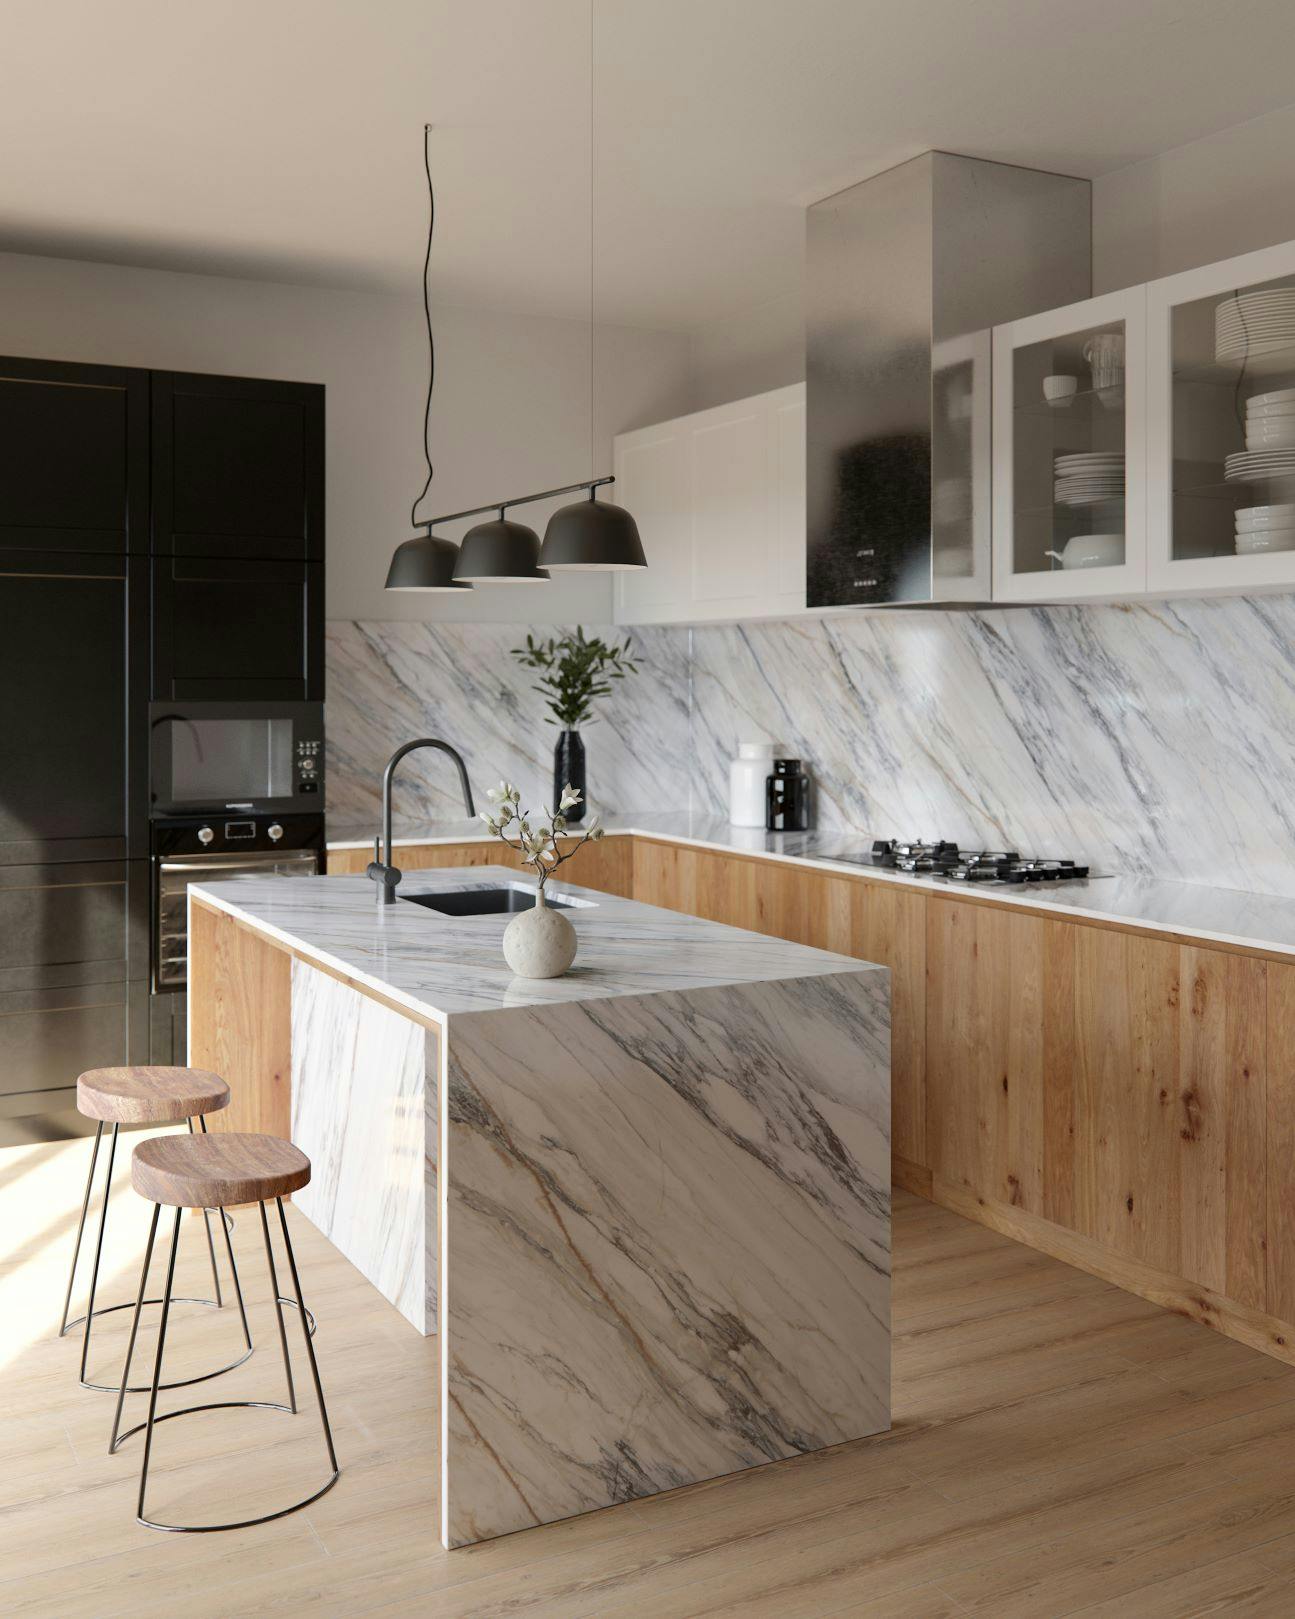 4 Marble-Inspired Kitchen Styles to Pin For Your Dream Board